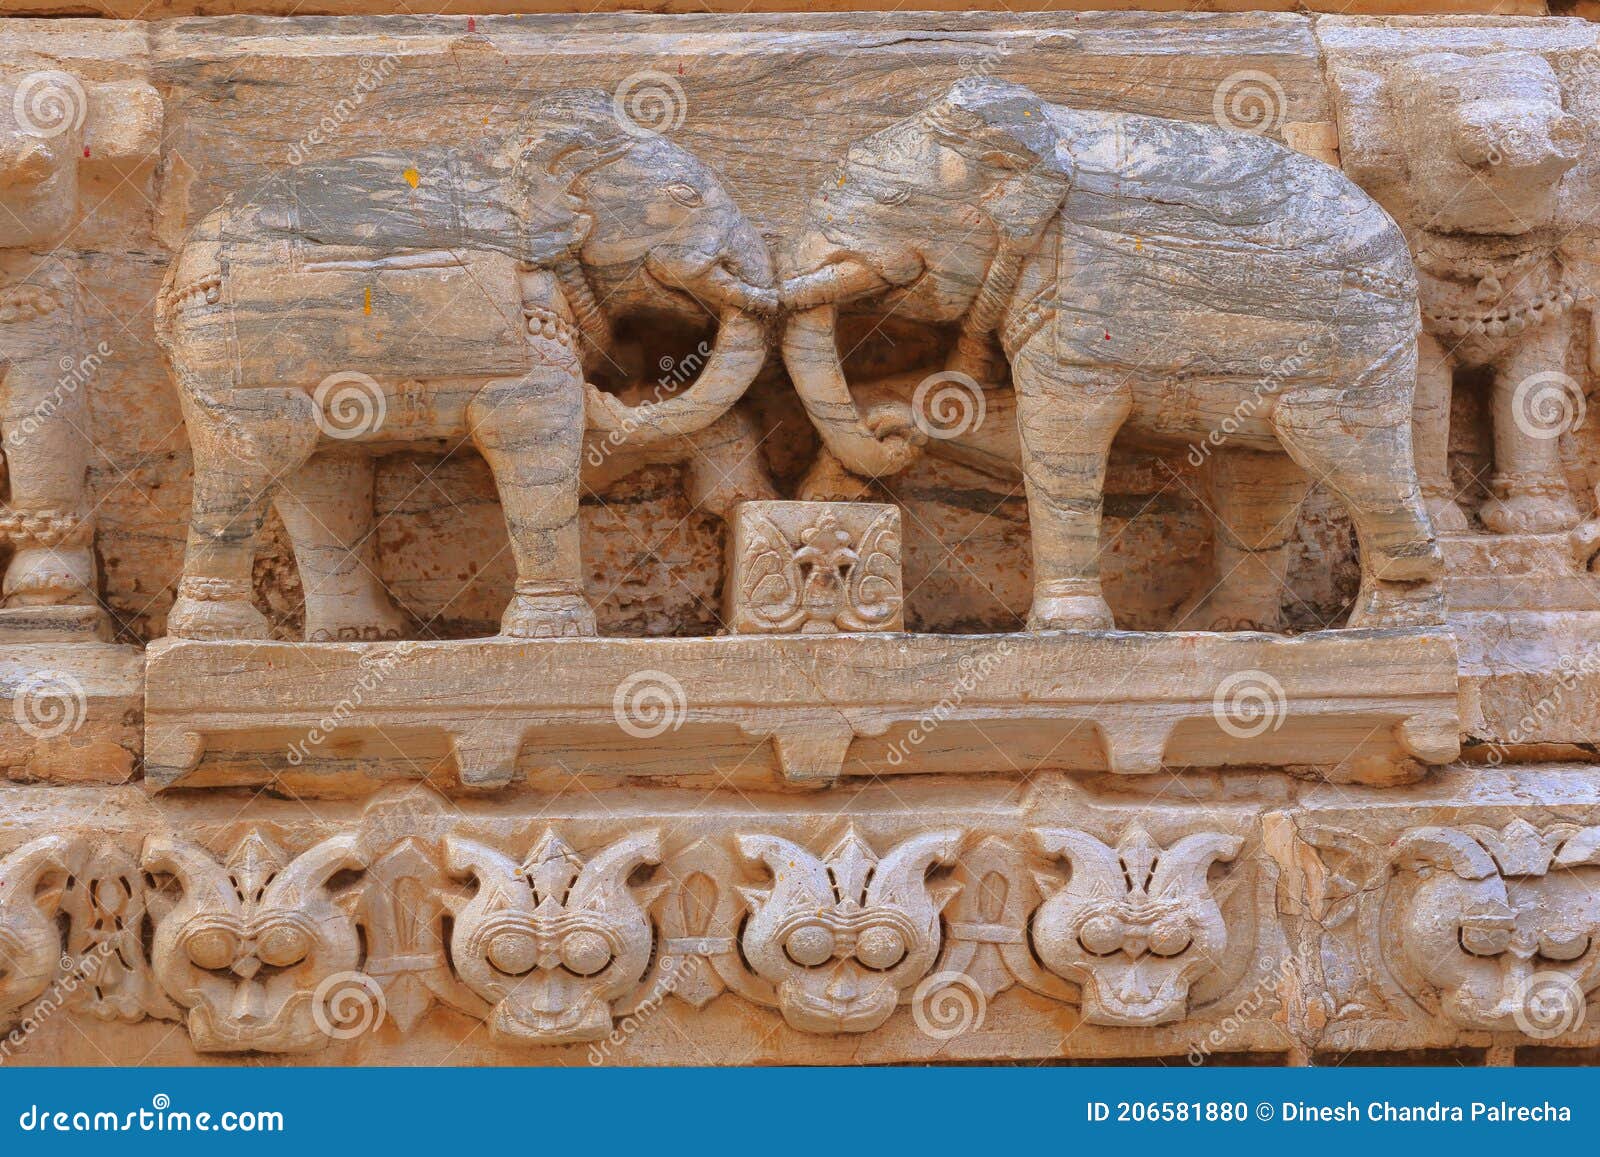 Work Done on Ancient, Artistic Stone, Wallpaper Stock Photo - Image of  architecture, 1651: 206581880